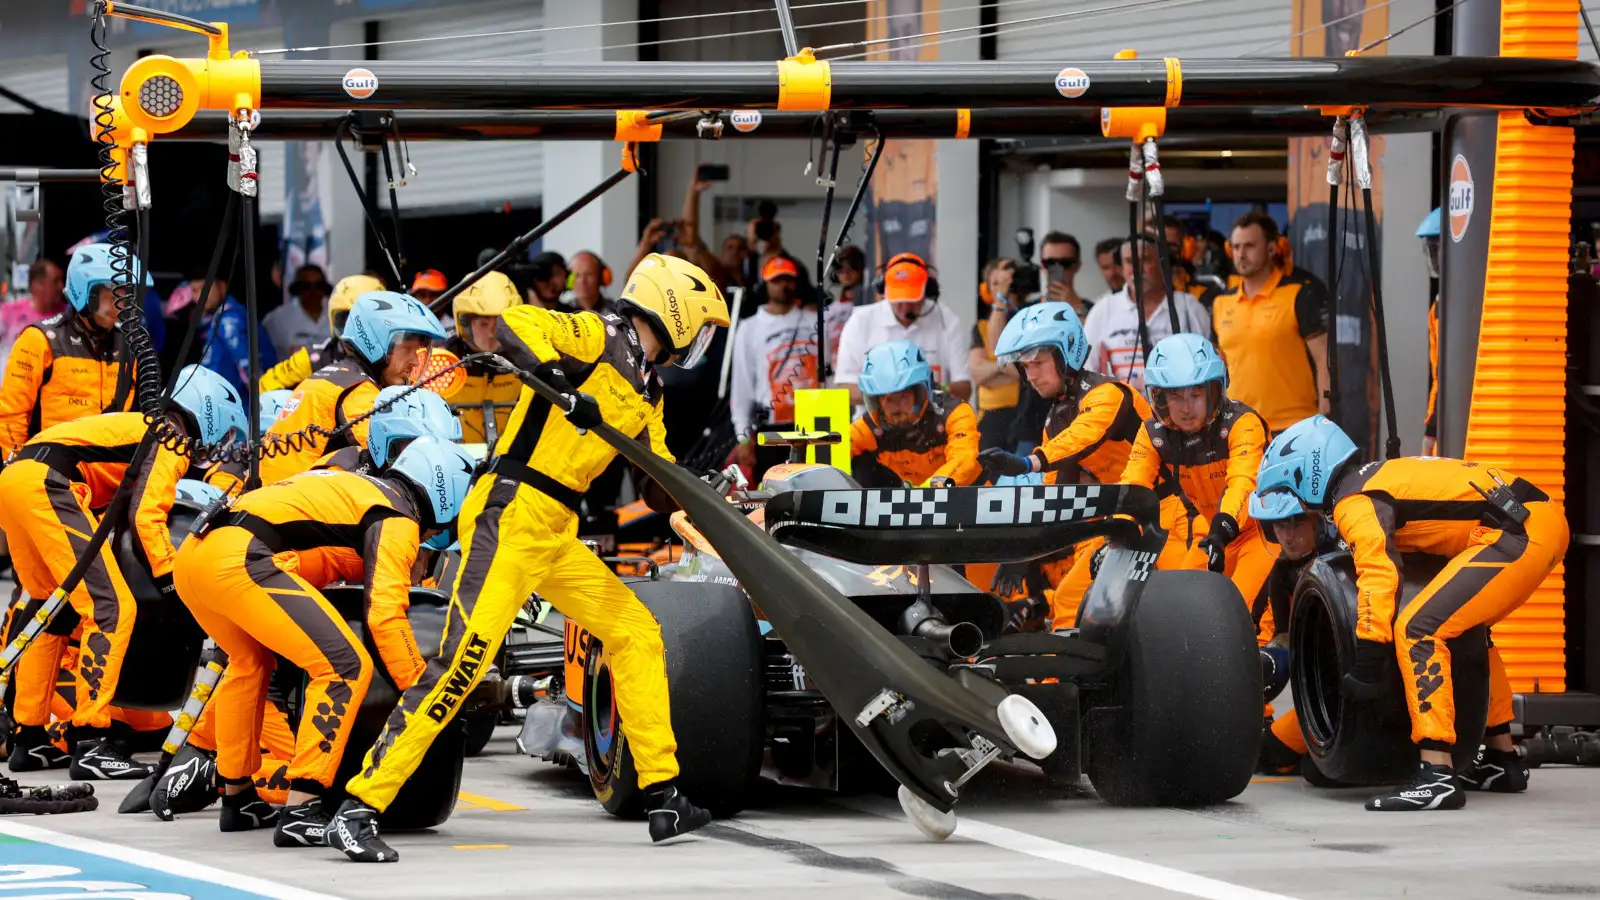 Lando Norris surrounded by McLaren mechanics in a pit stop. Miami May 2022